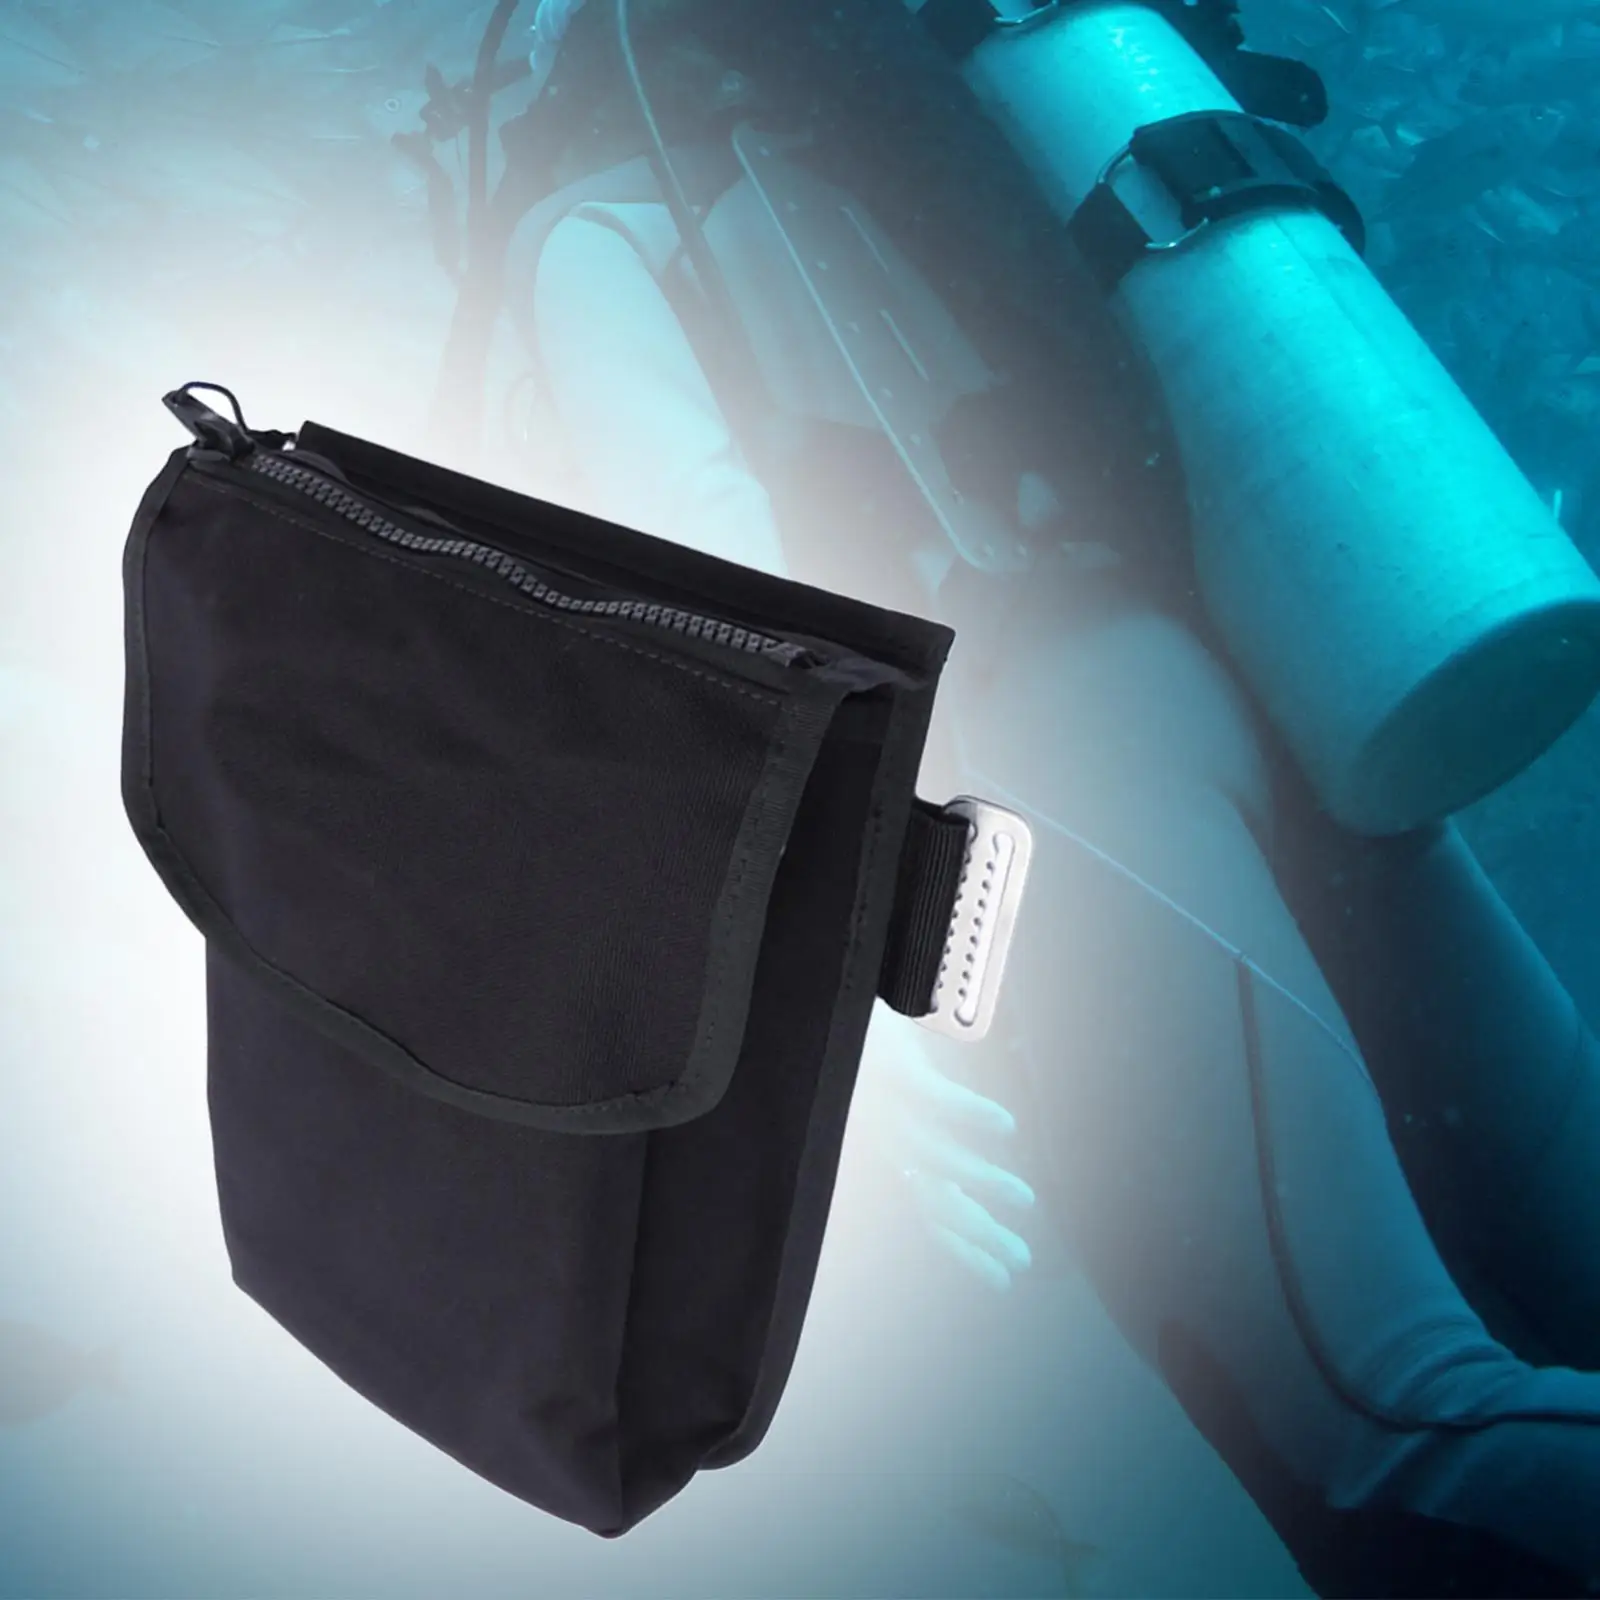 Scuba Diving Thigh Pocket Storage Pocket Pouch Scuba Diving Accessories for Water Sports Underwater Swimming Snorkeling Black